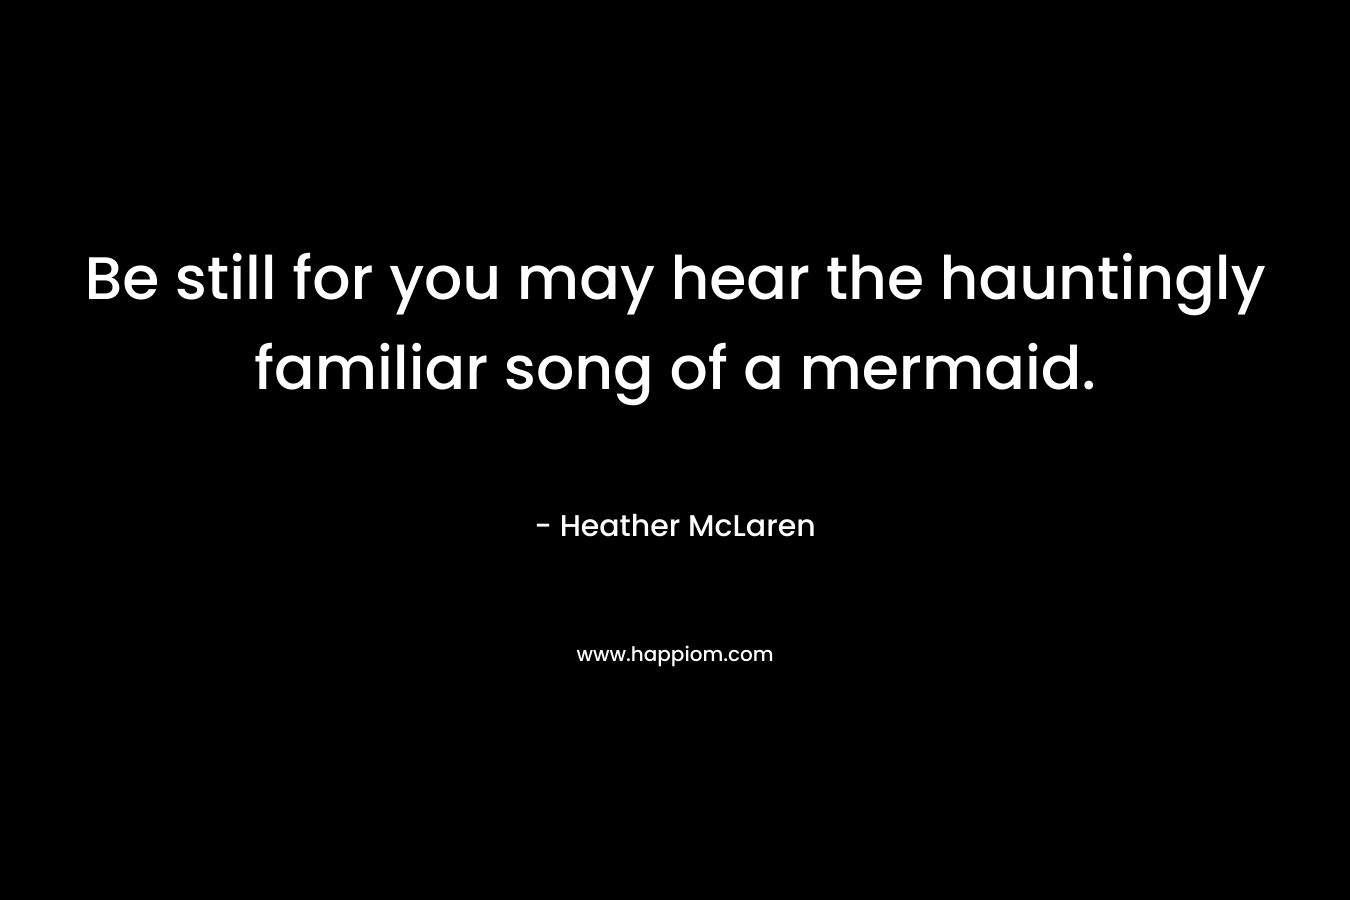 Be still for you may hear the hauntingly familiar song of a mermaid.